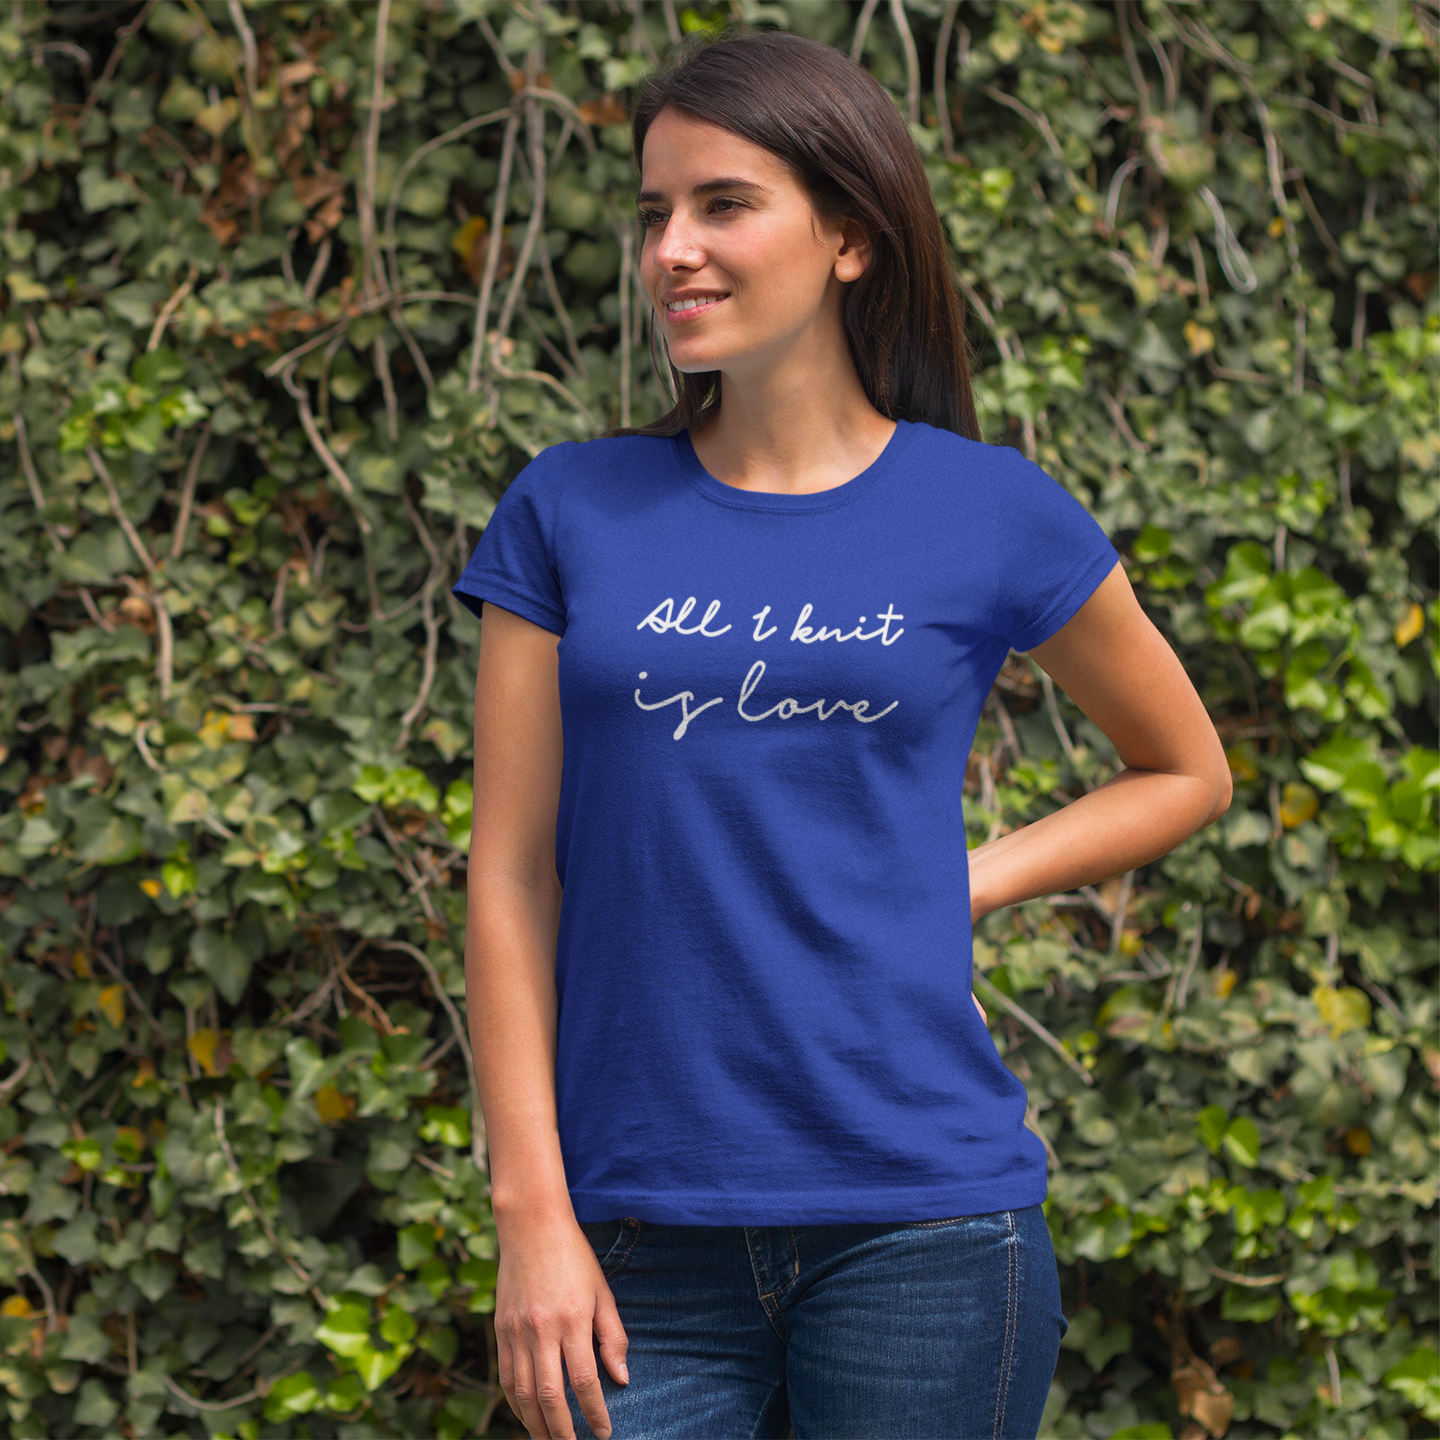 'All I knit is love' adult shirt